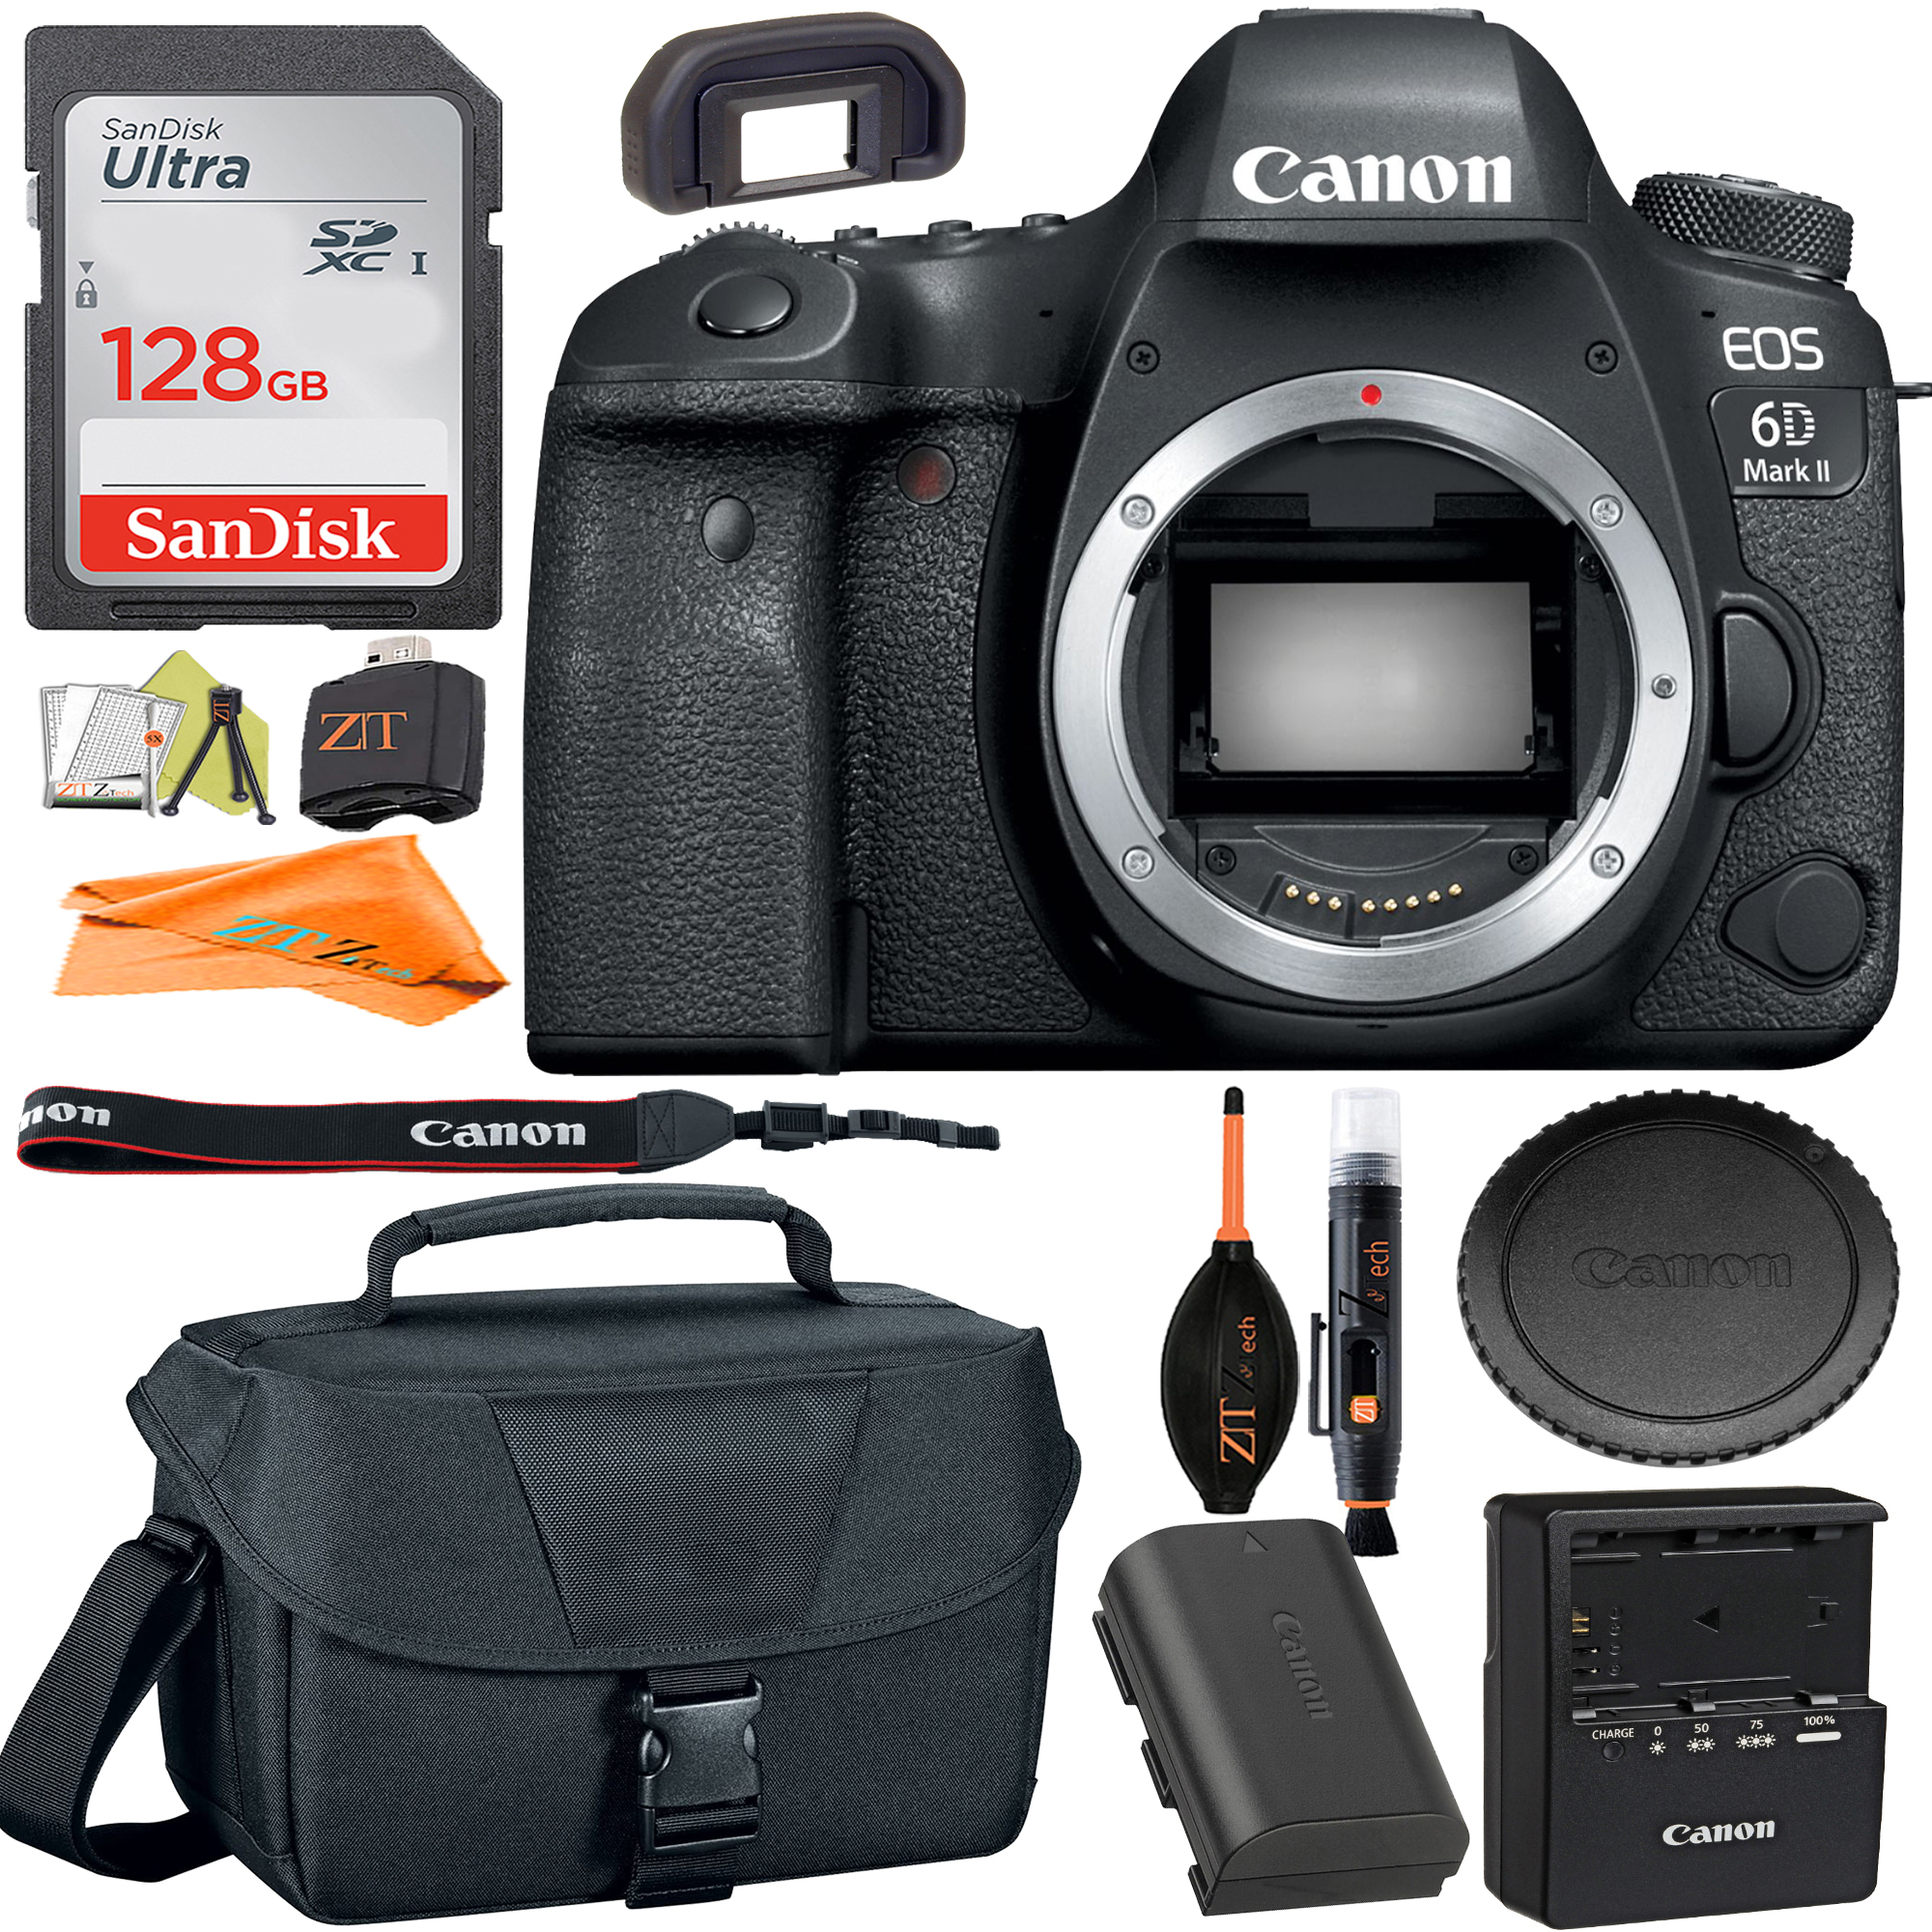 Canon EOS 6D Mark II DSLR Camera (Body Only) with SanDisk 128GB Card + Case + ZeeTech Accessory Bundle